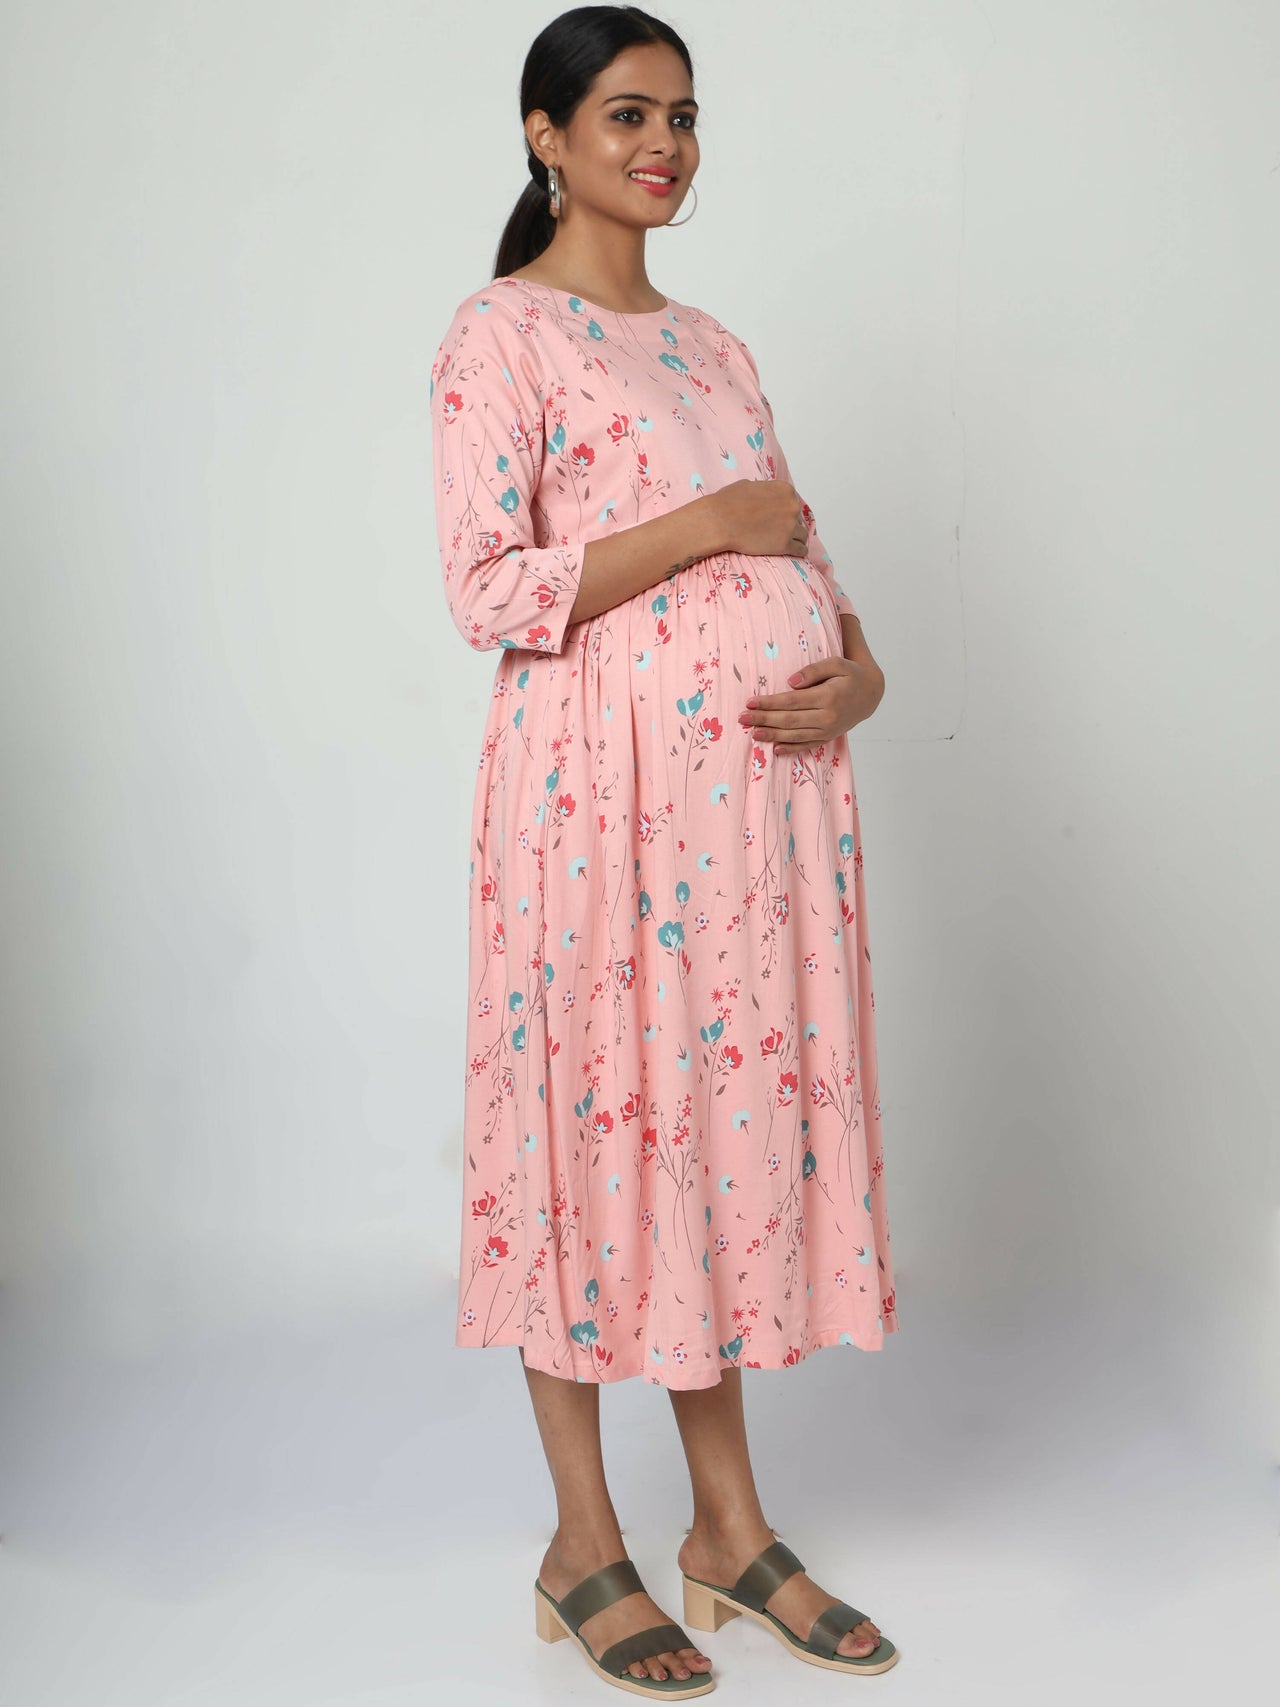 Manet Three Fourth Maternity Dress Floral Print With Concealed Zipper Nursing Access - Peach - Distacart